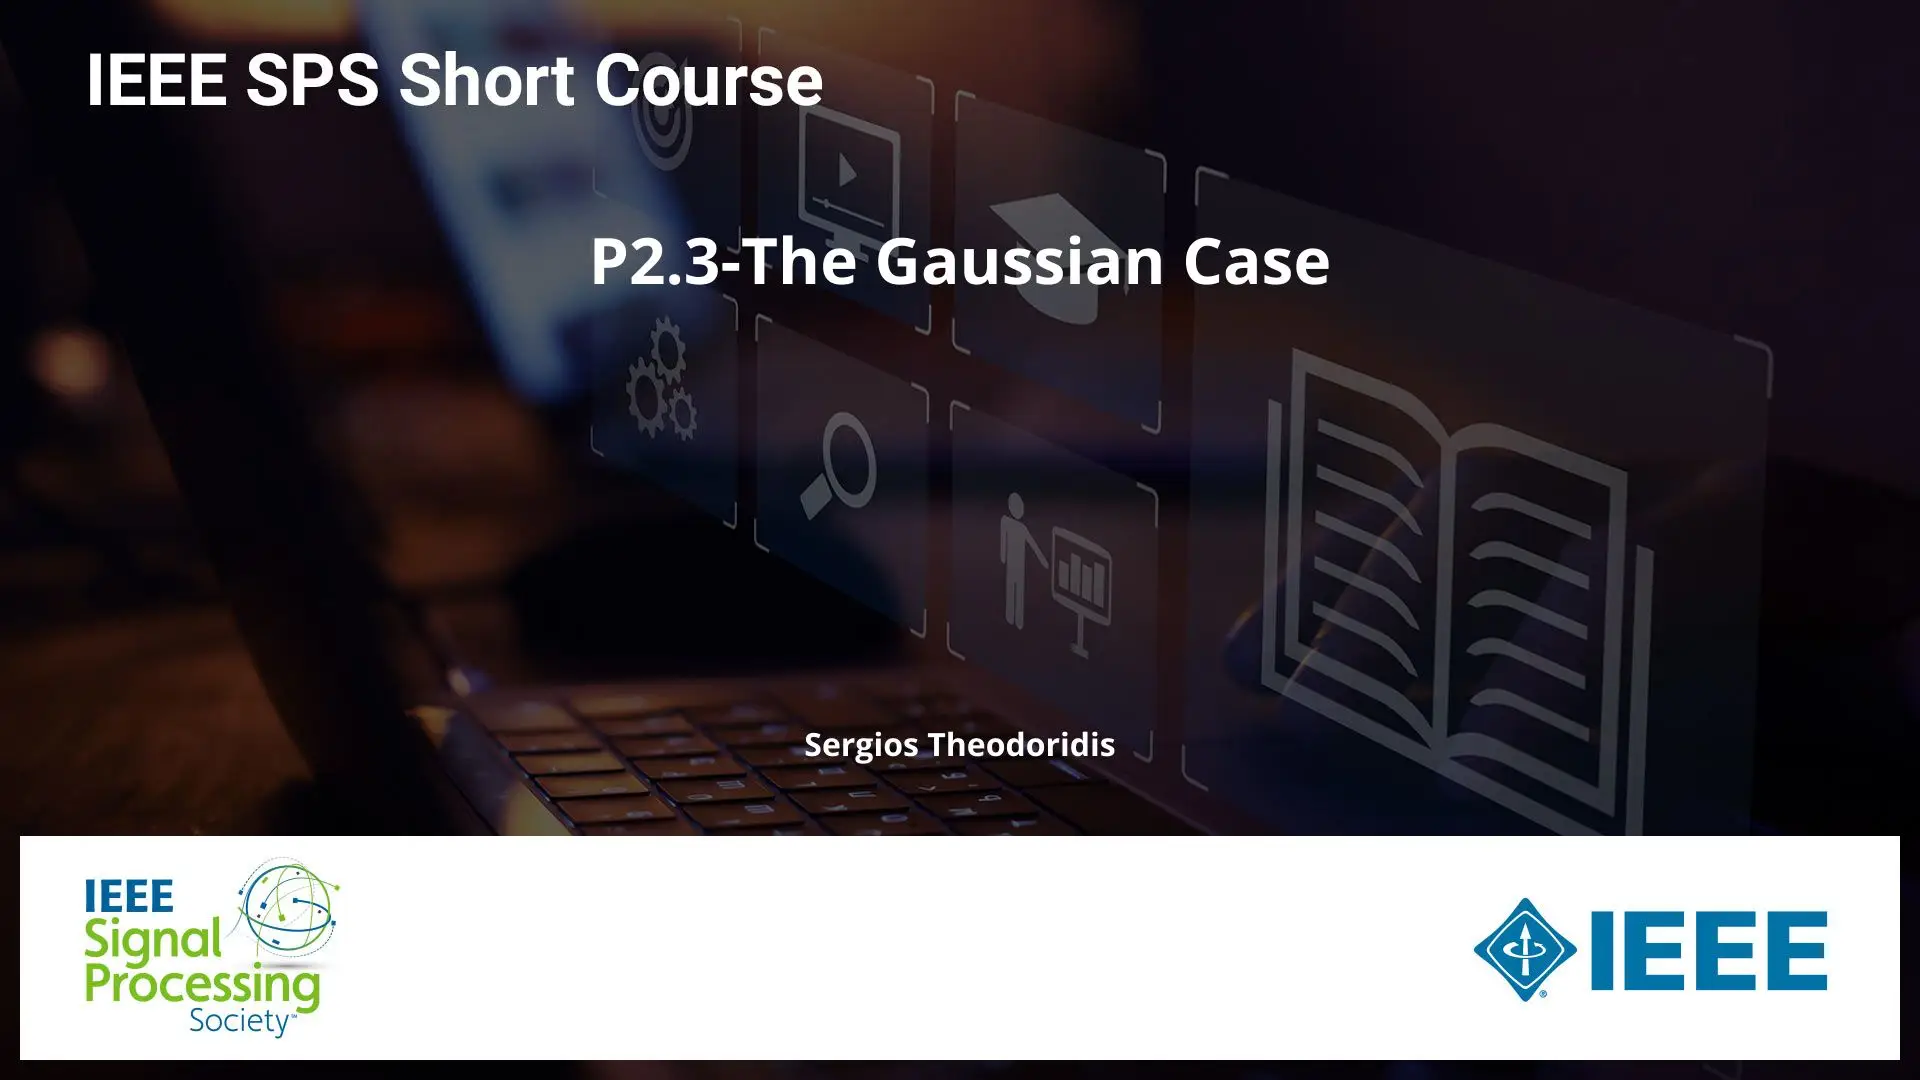 P2.3-The Gaussian Case